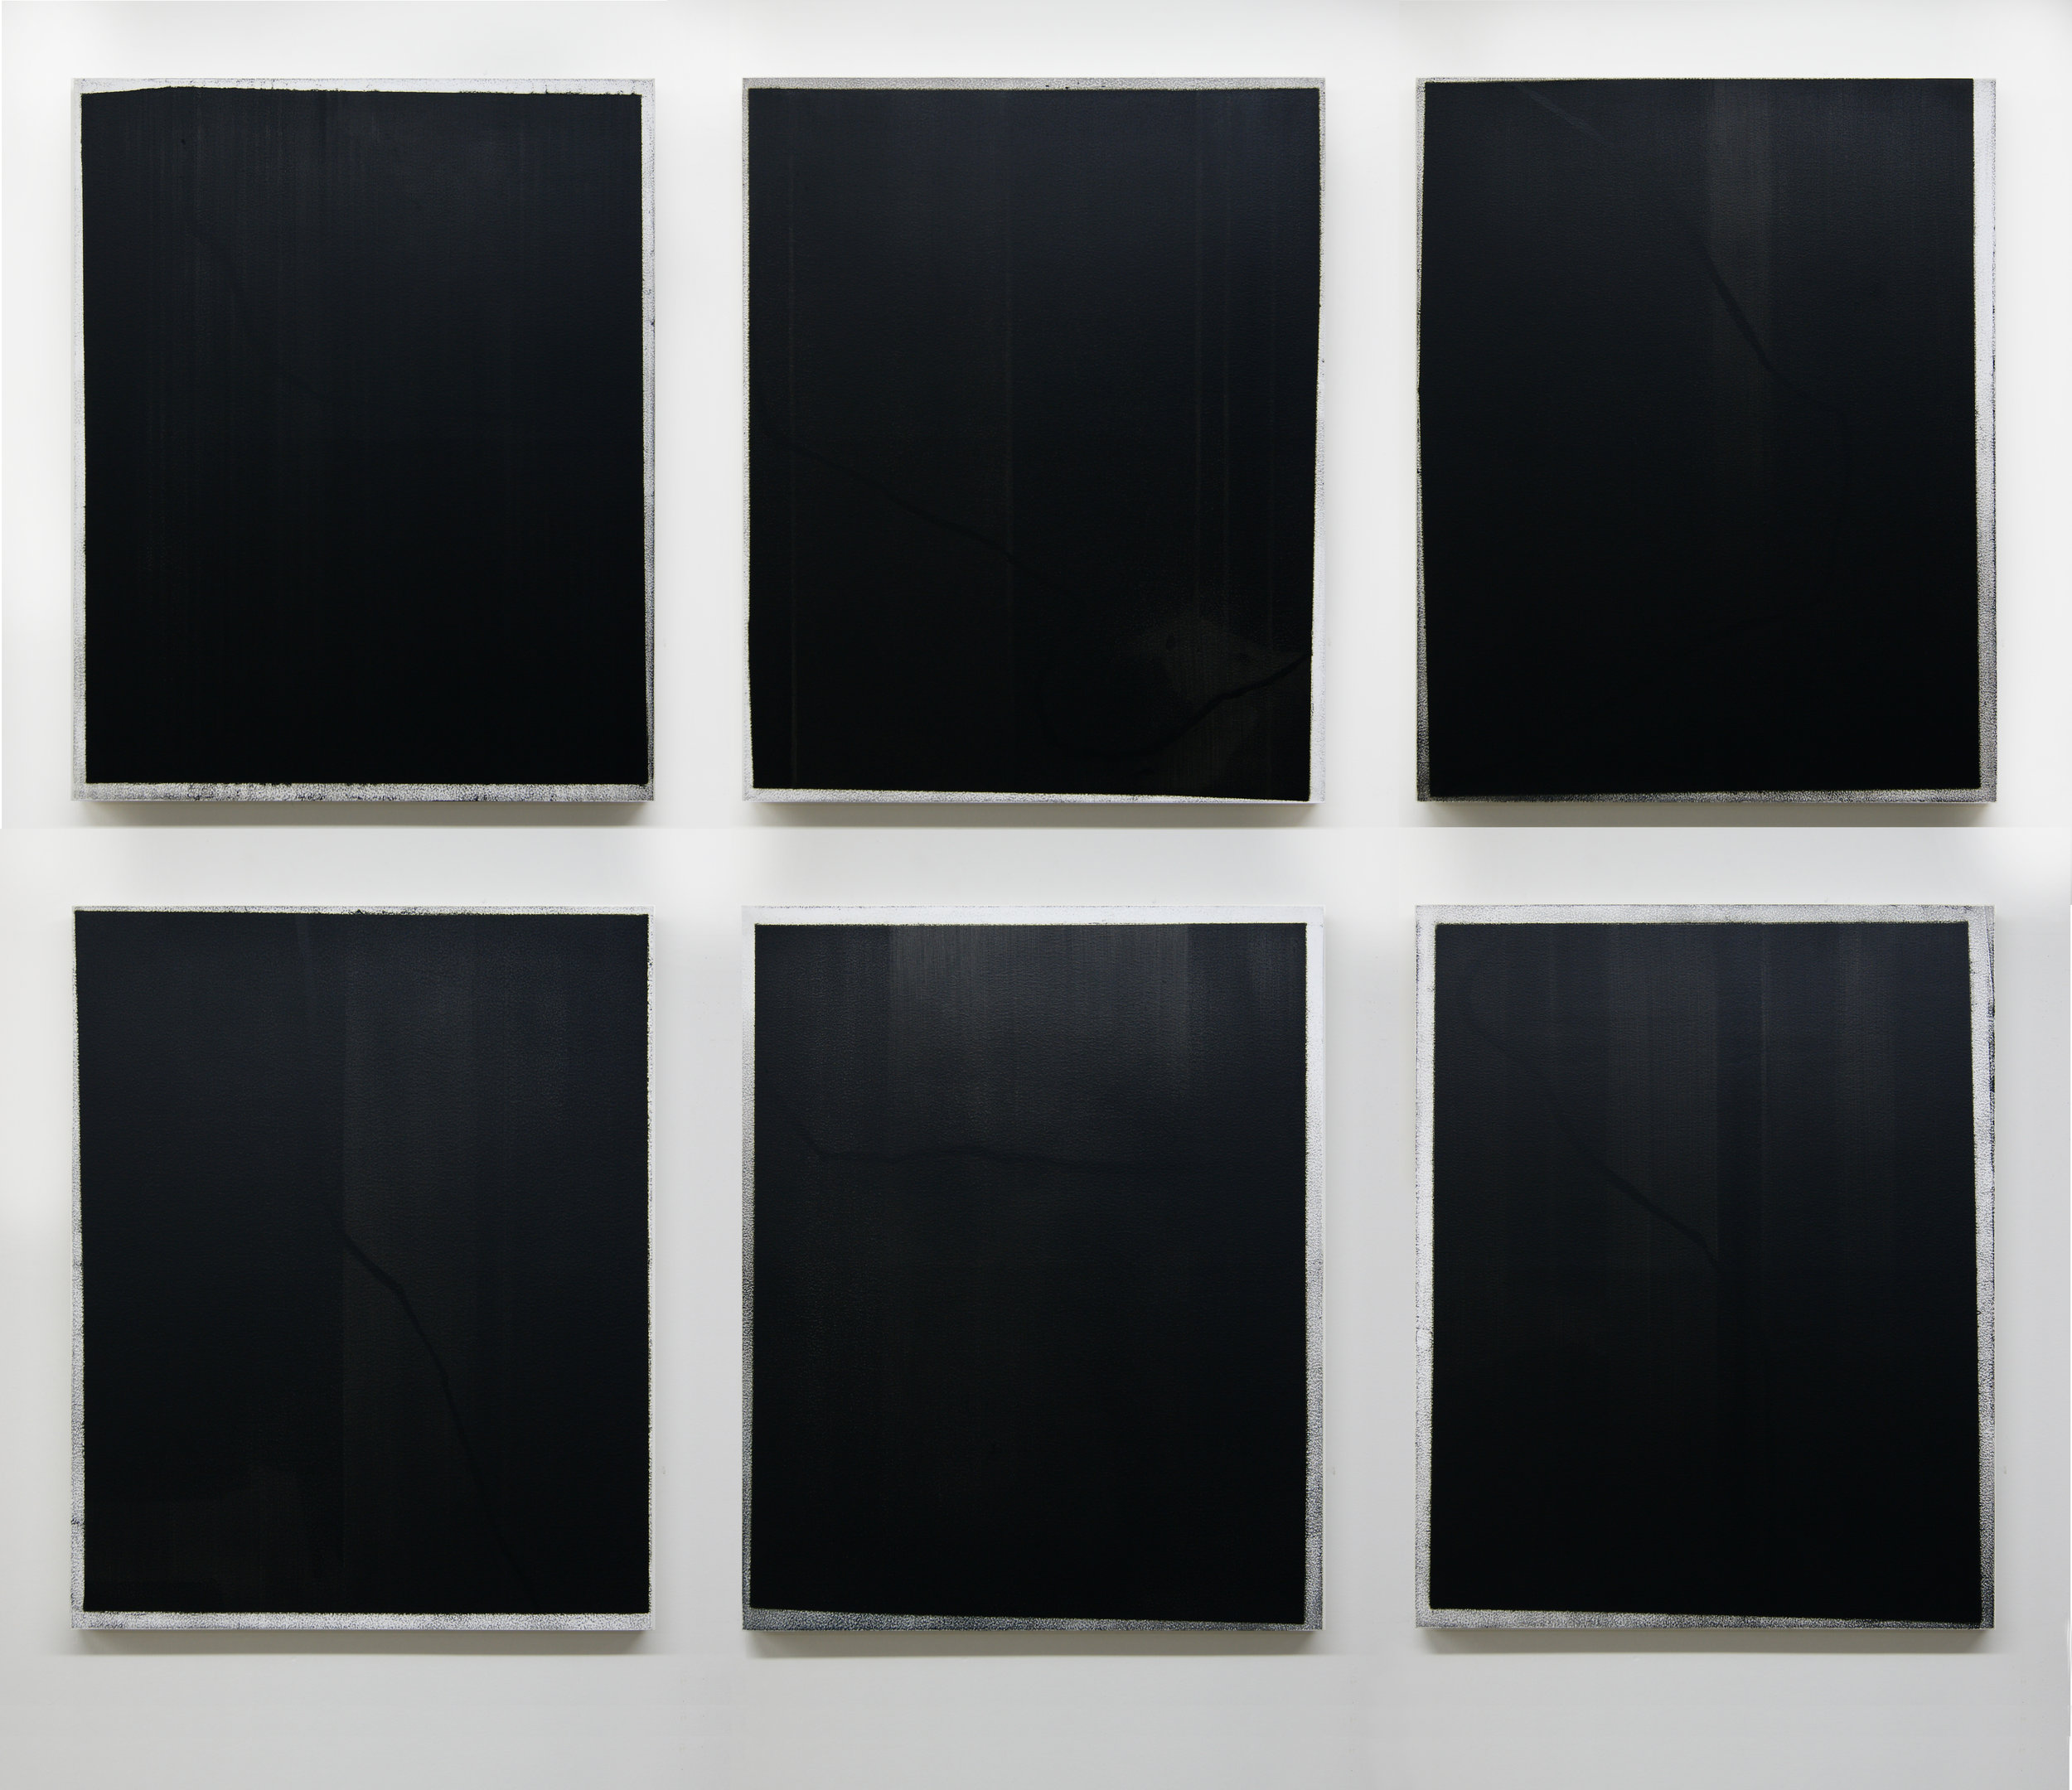  Black Route I-VI, 2015 (Installation view)  Acrylic on panel, 30 x 24 inches each 